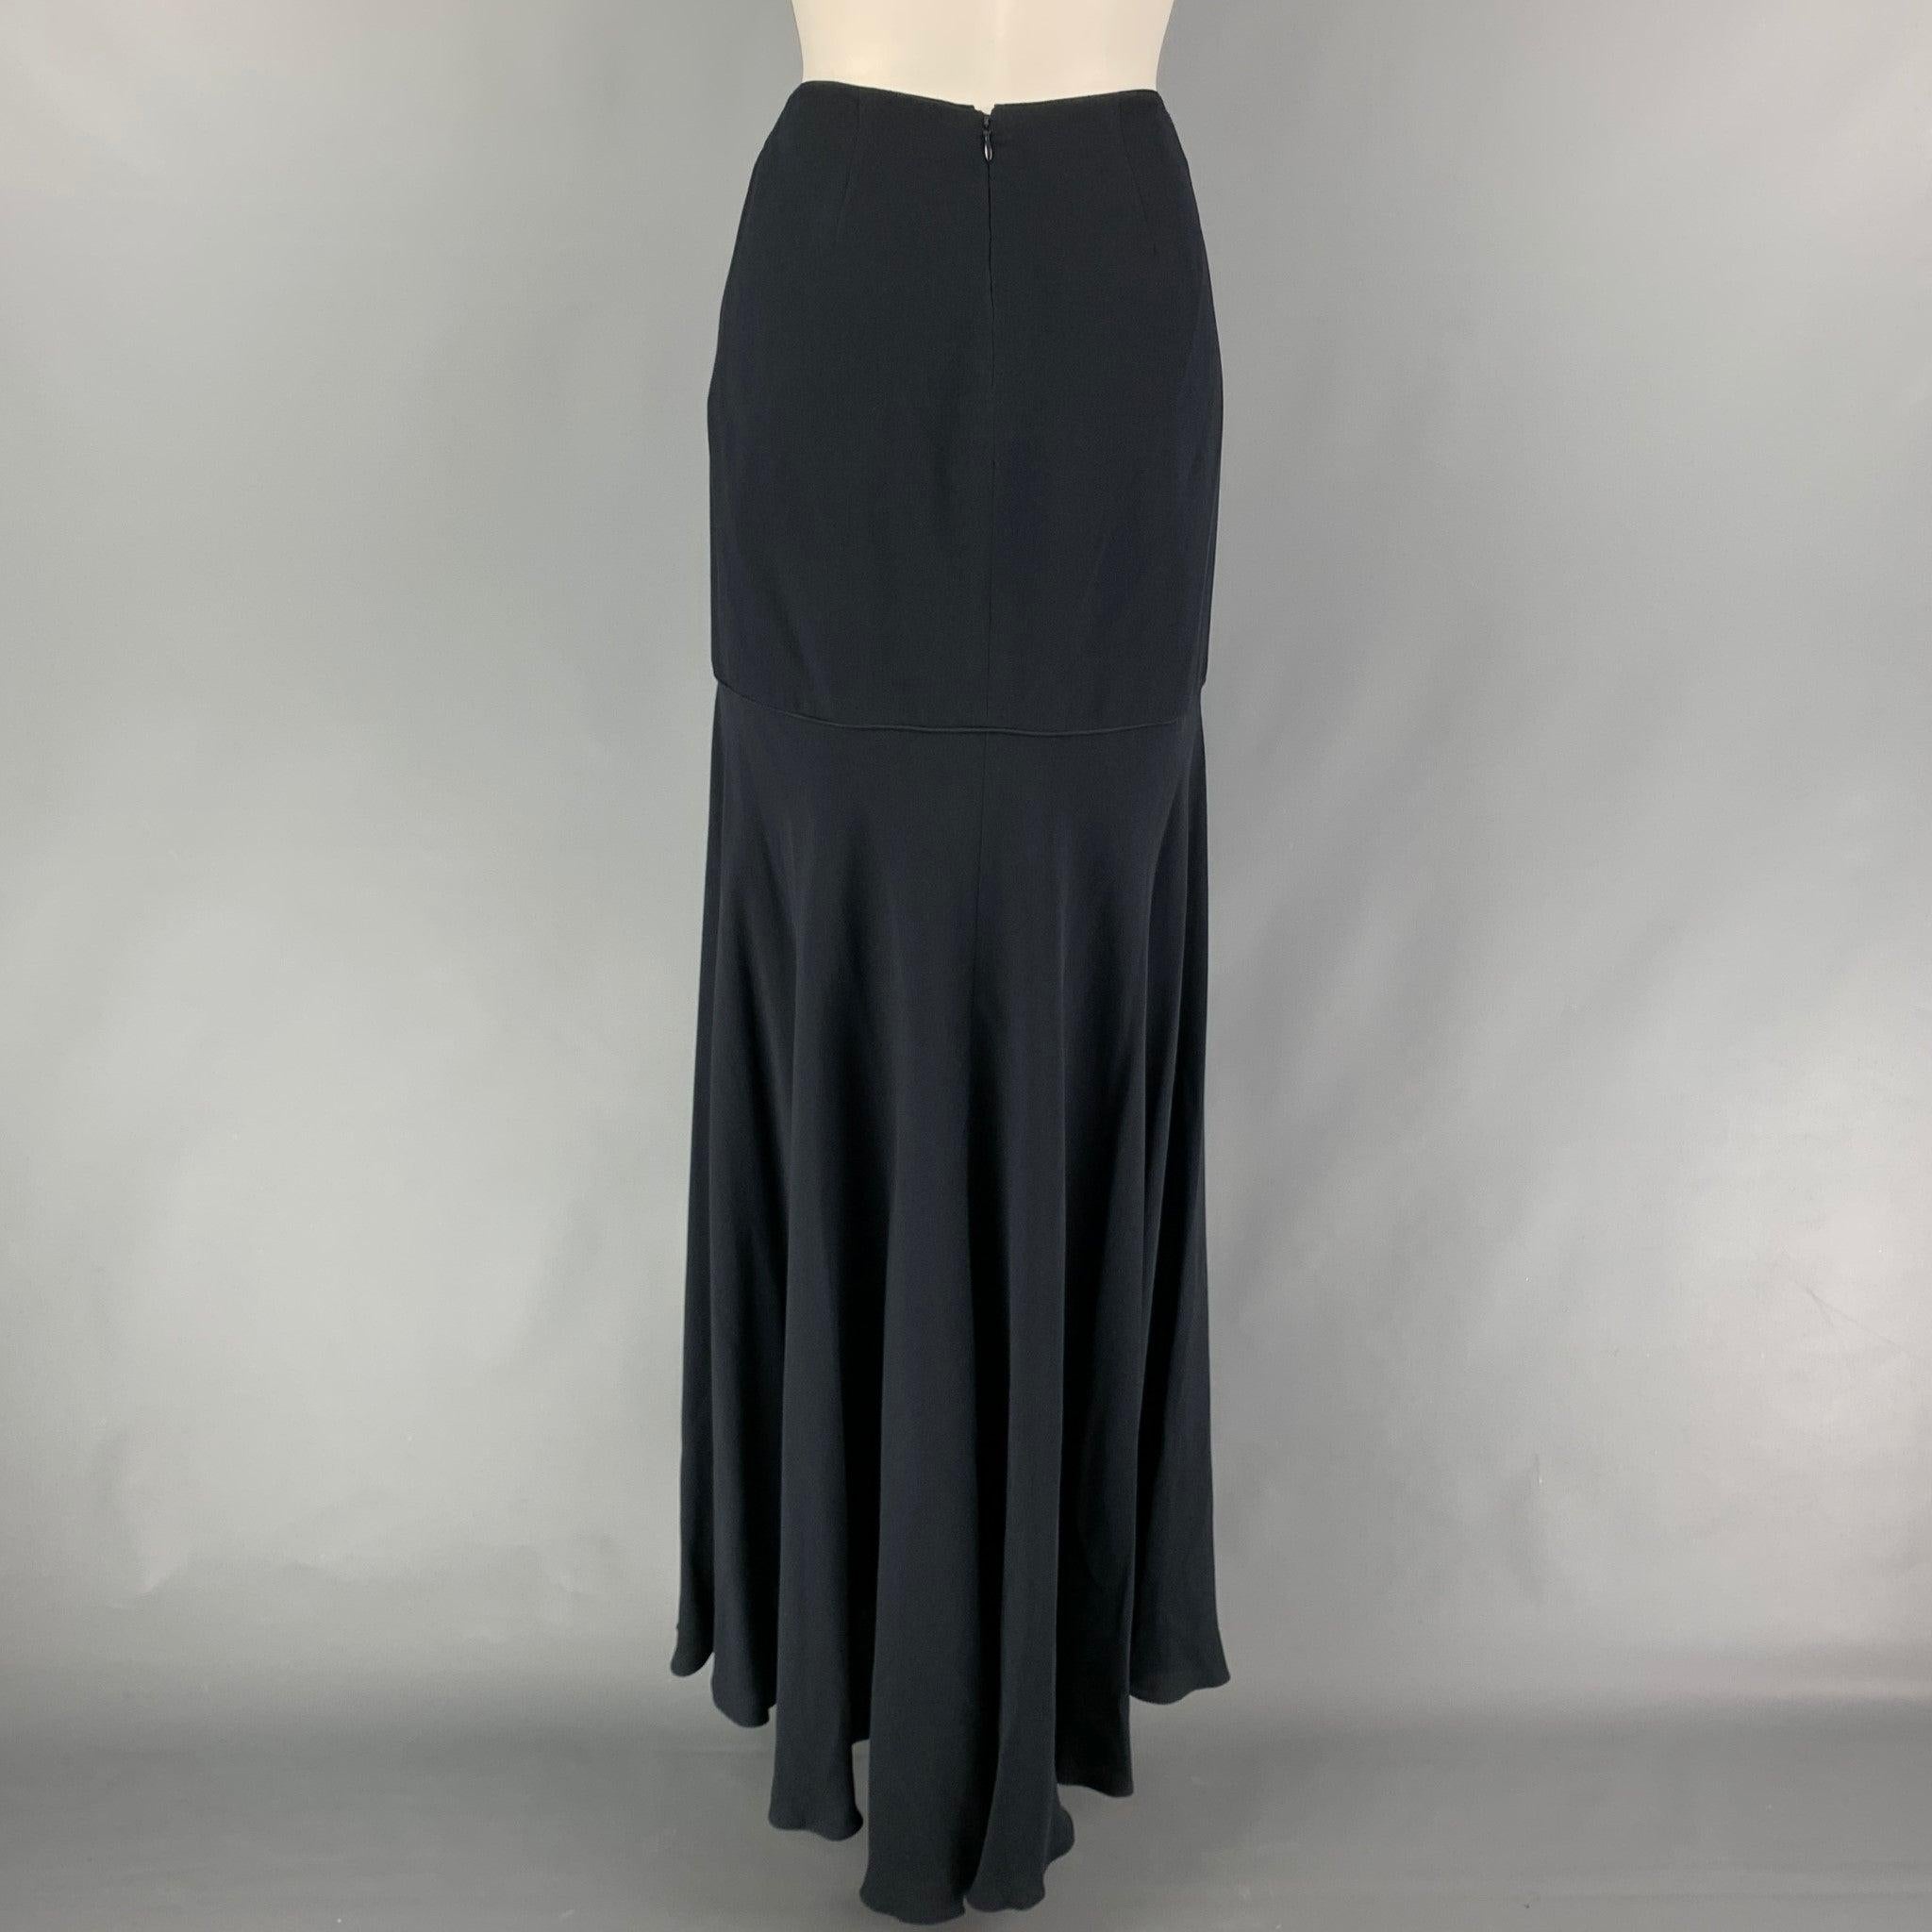 VALENTINO Size 8 Black Acetate Blend Long Skirt In Good Condition For Sale In San Francisco, CA